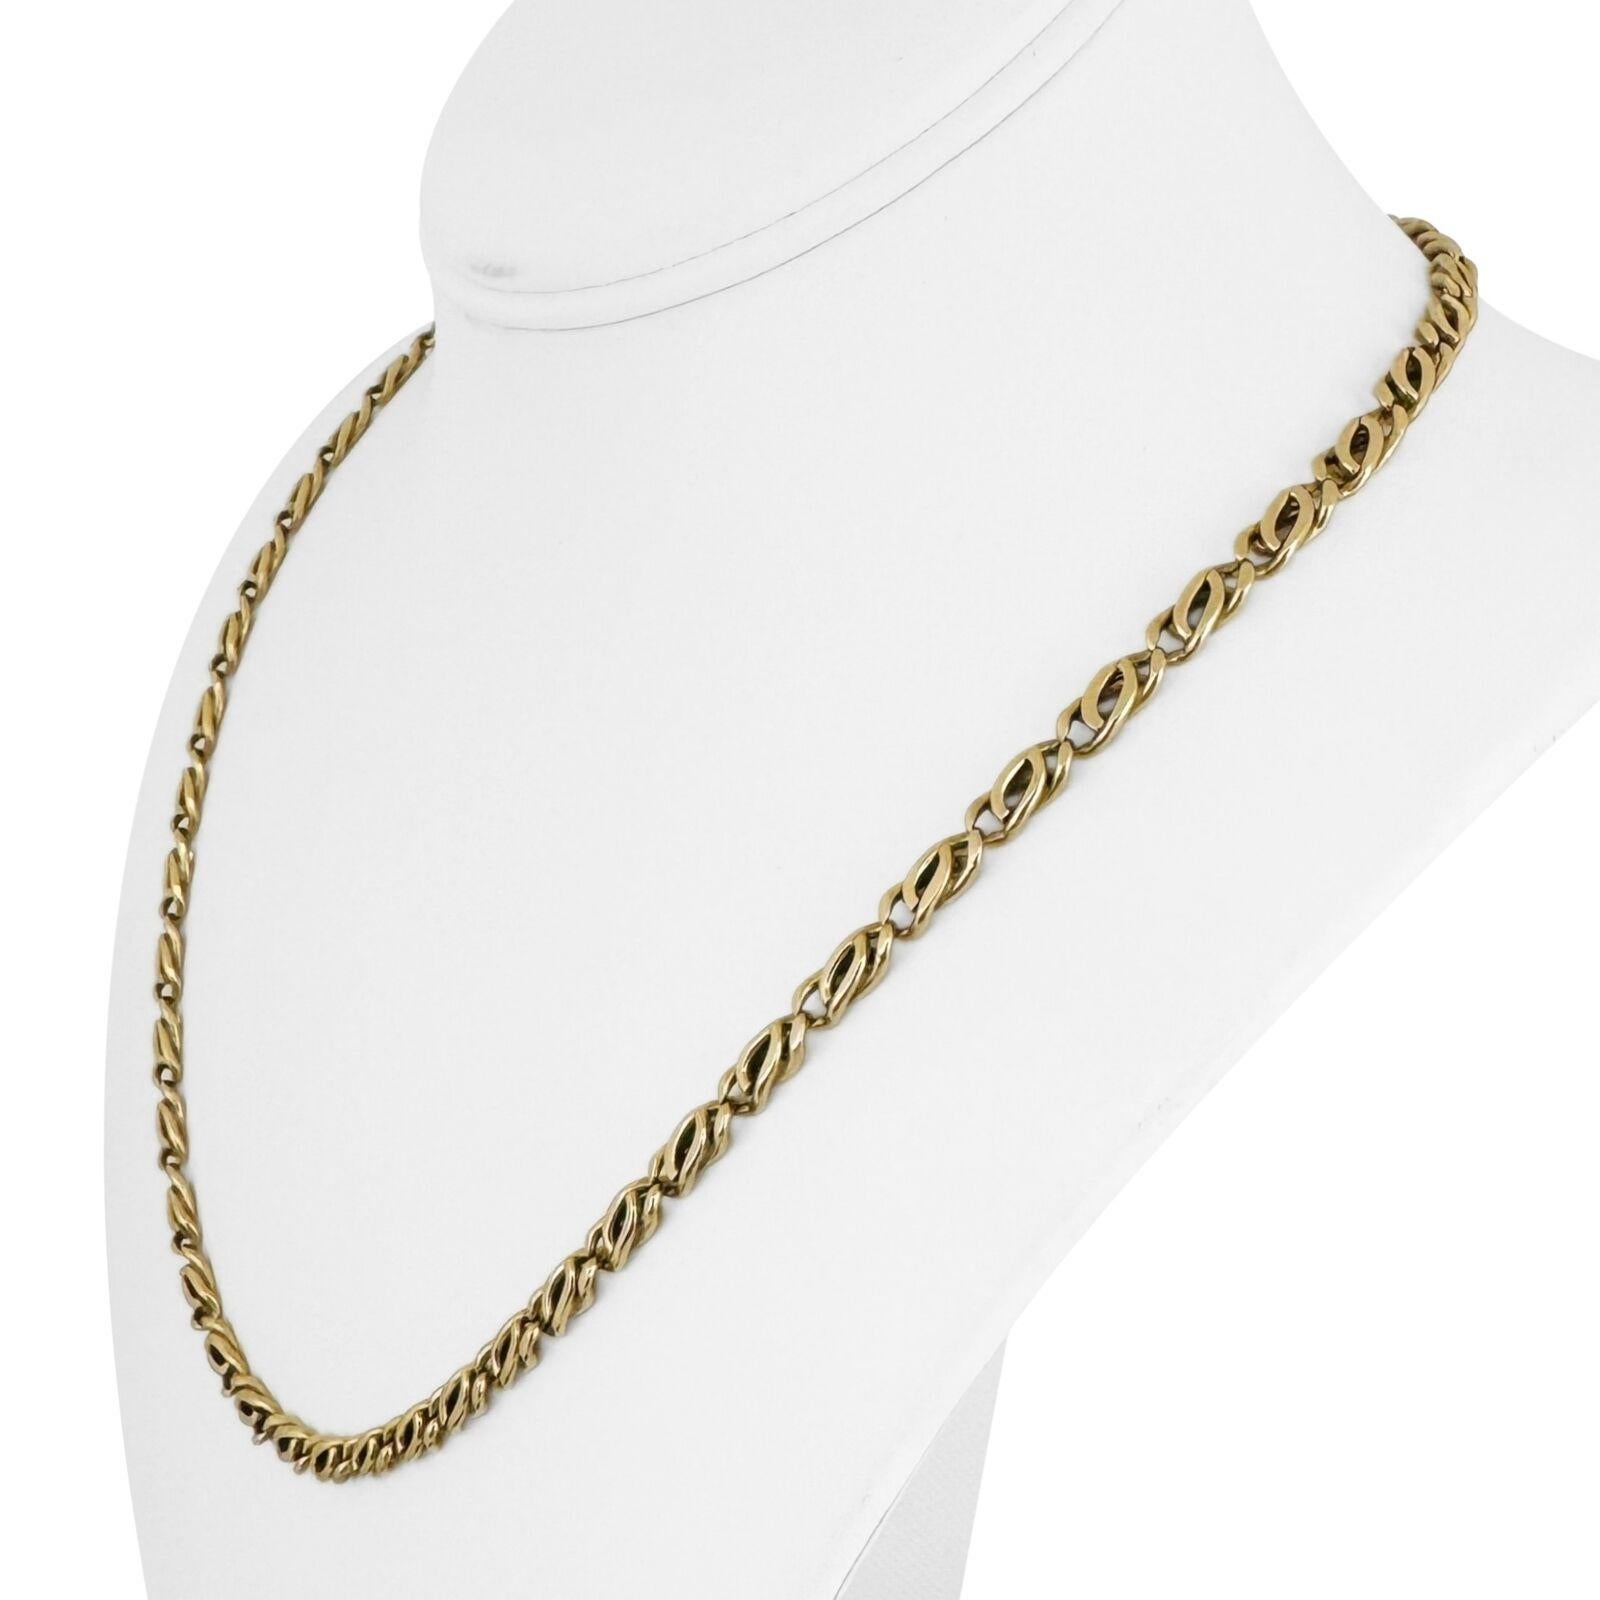 14k Yellow Gold 31g Solid 4.5mm Fancy Curb Link Chain Necklace 20.5